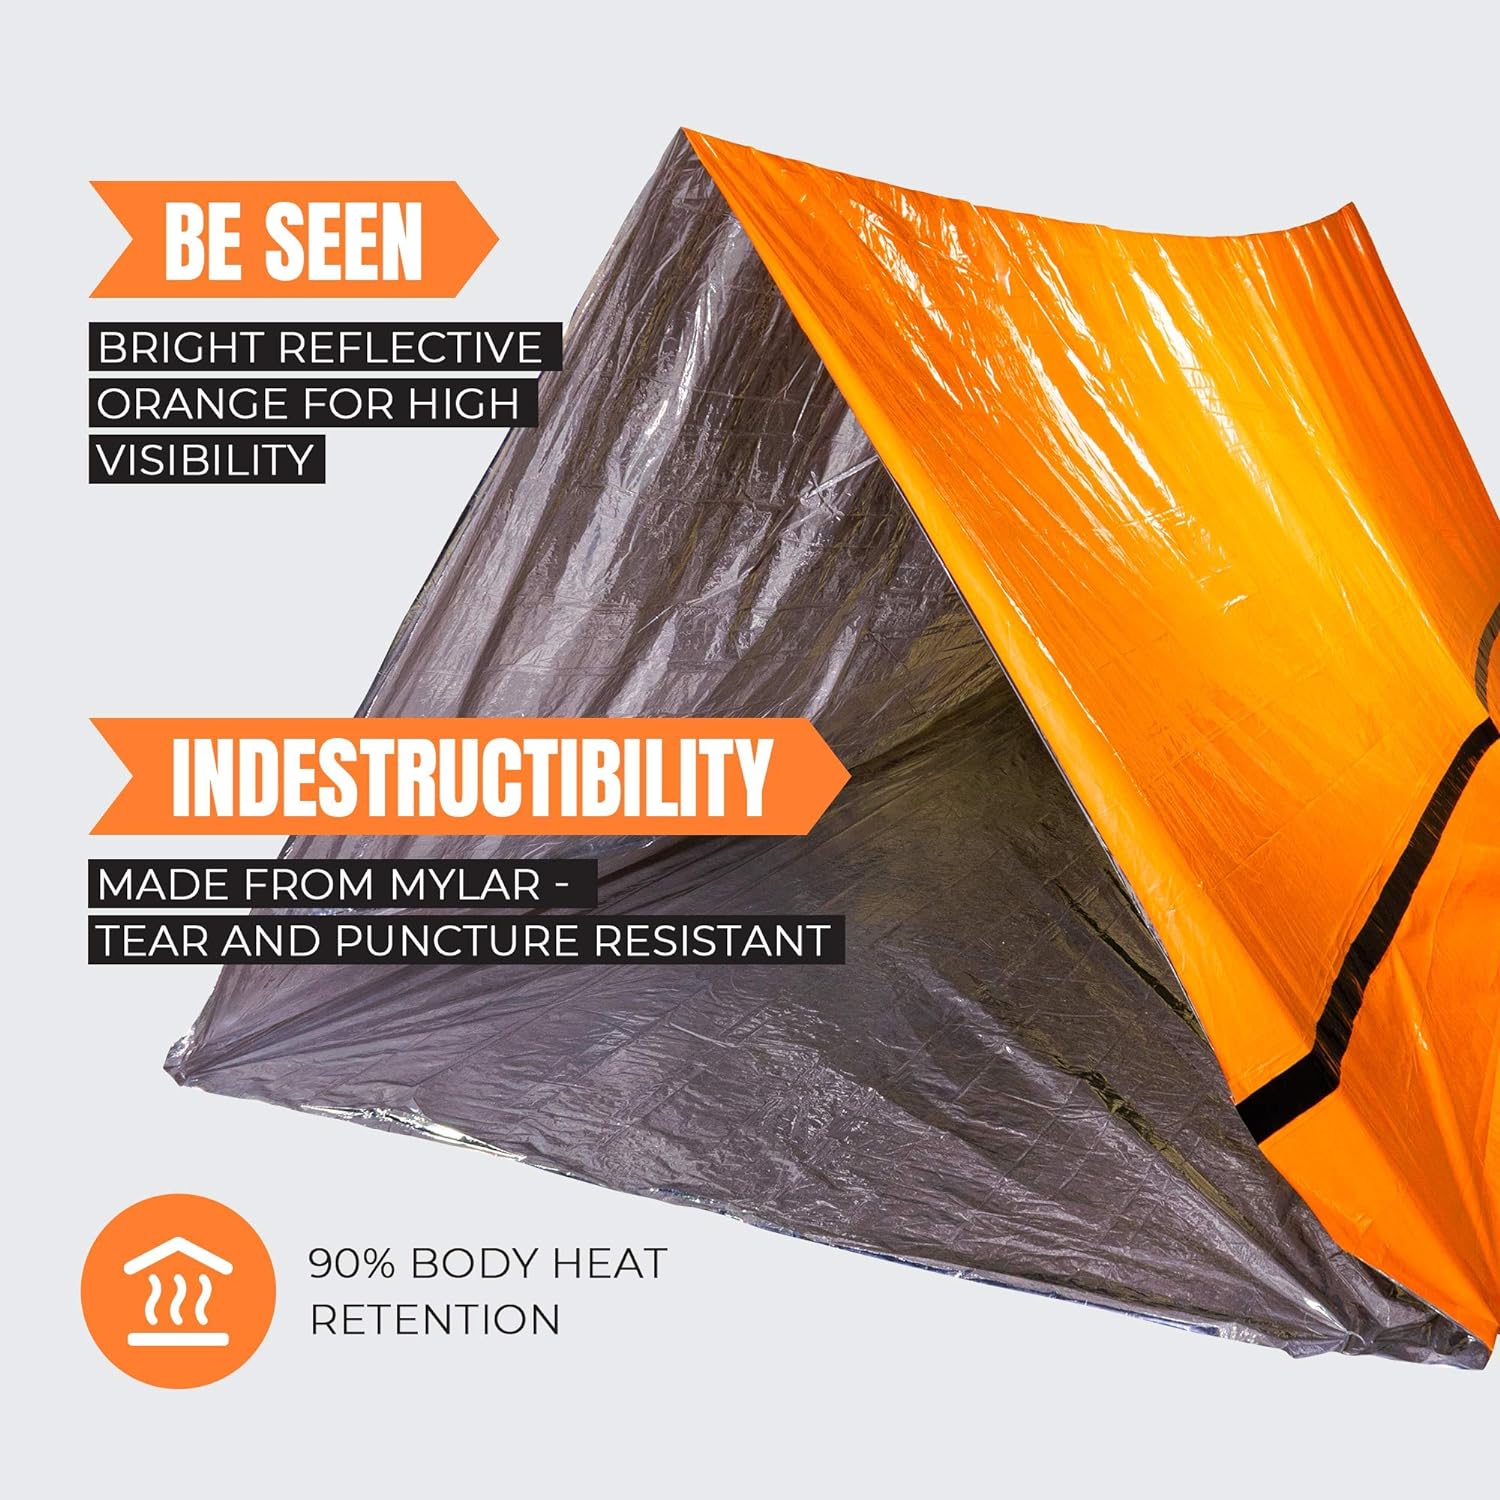 MEKKAPRO Emergency Tent Shelter Survival Tent 2 Person Resistant & Ultra Lightweight Life Tent - Water & Windproof Tube Tent for Camping, Hiking & Outdoor Activities